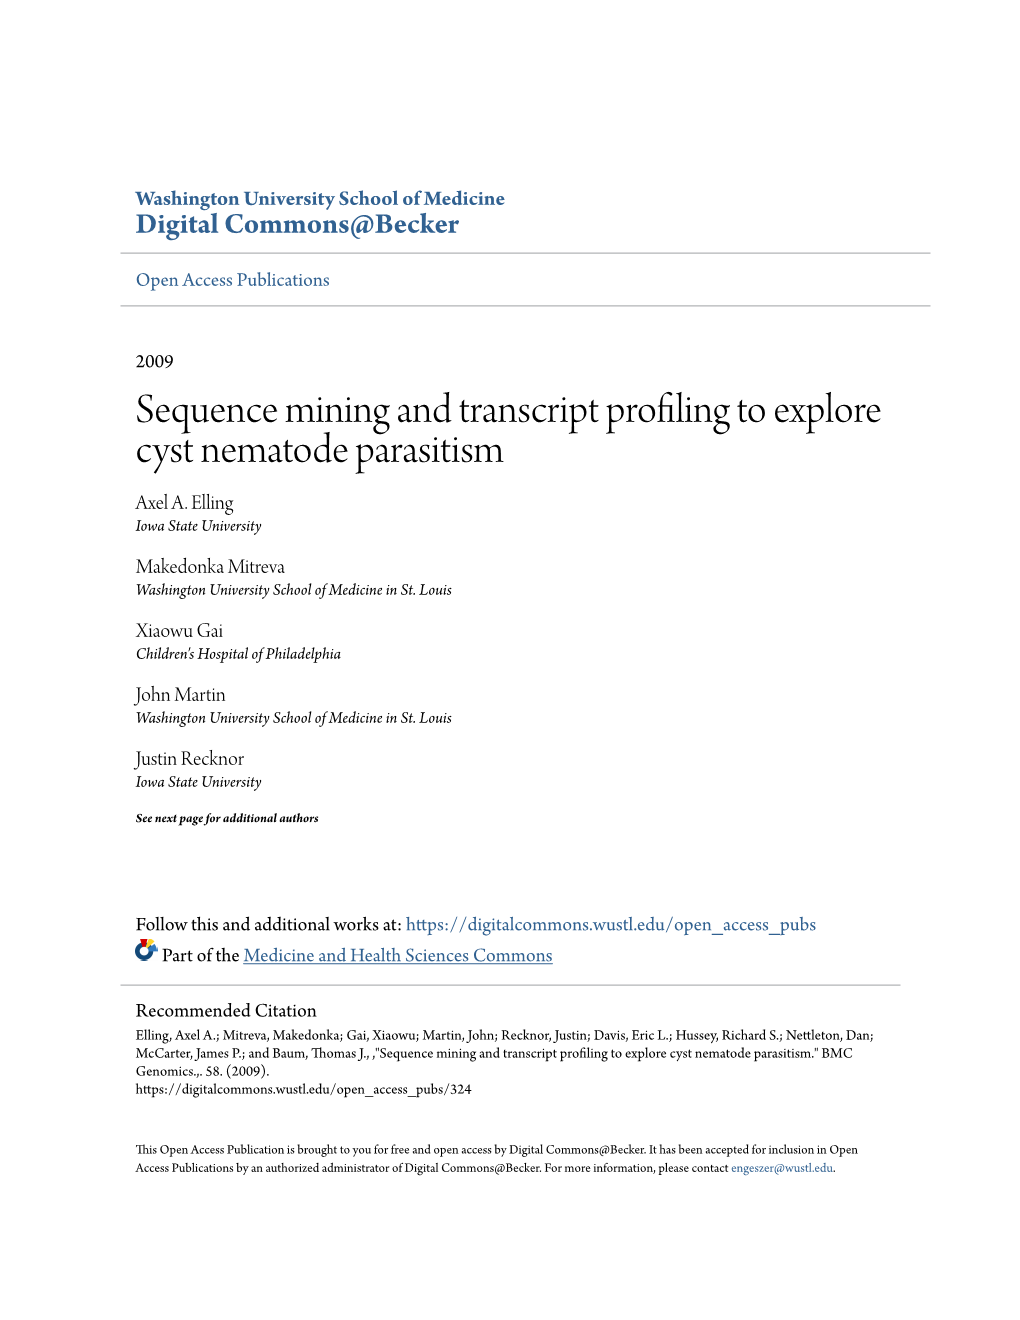 Sequence Mining and Transcript Profiling to Explore Cyst Nematode Parasitism Axel A